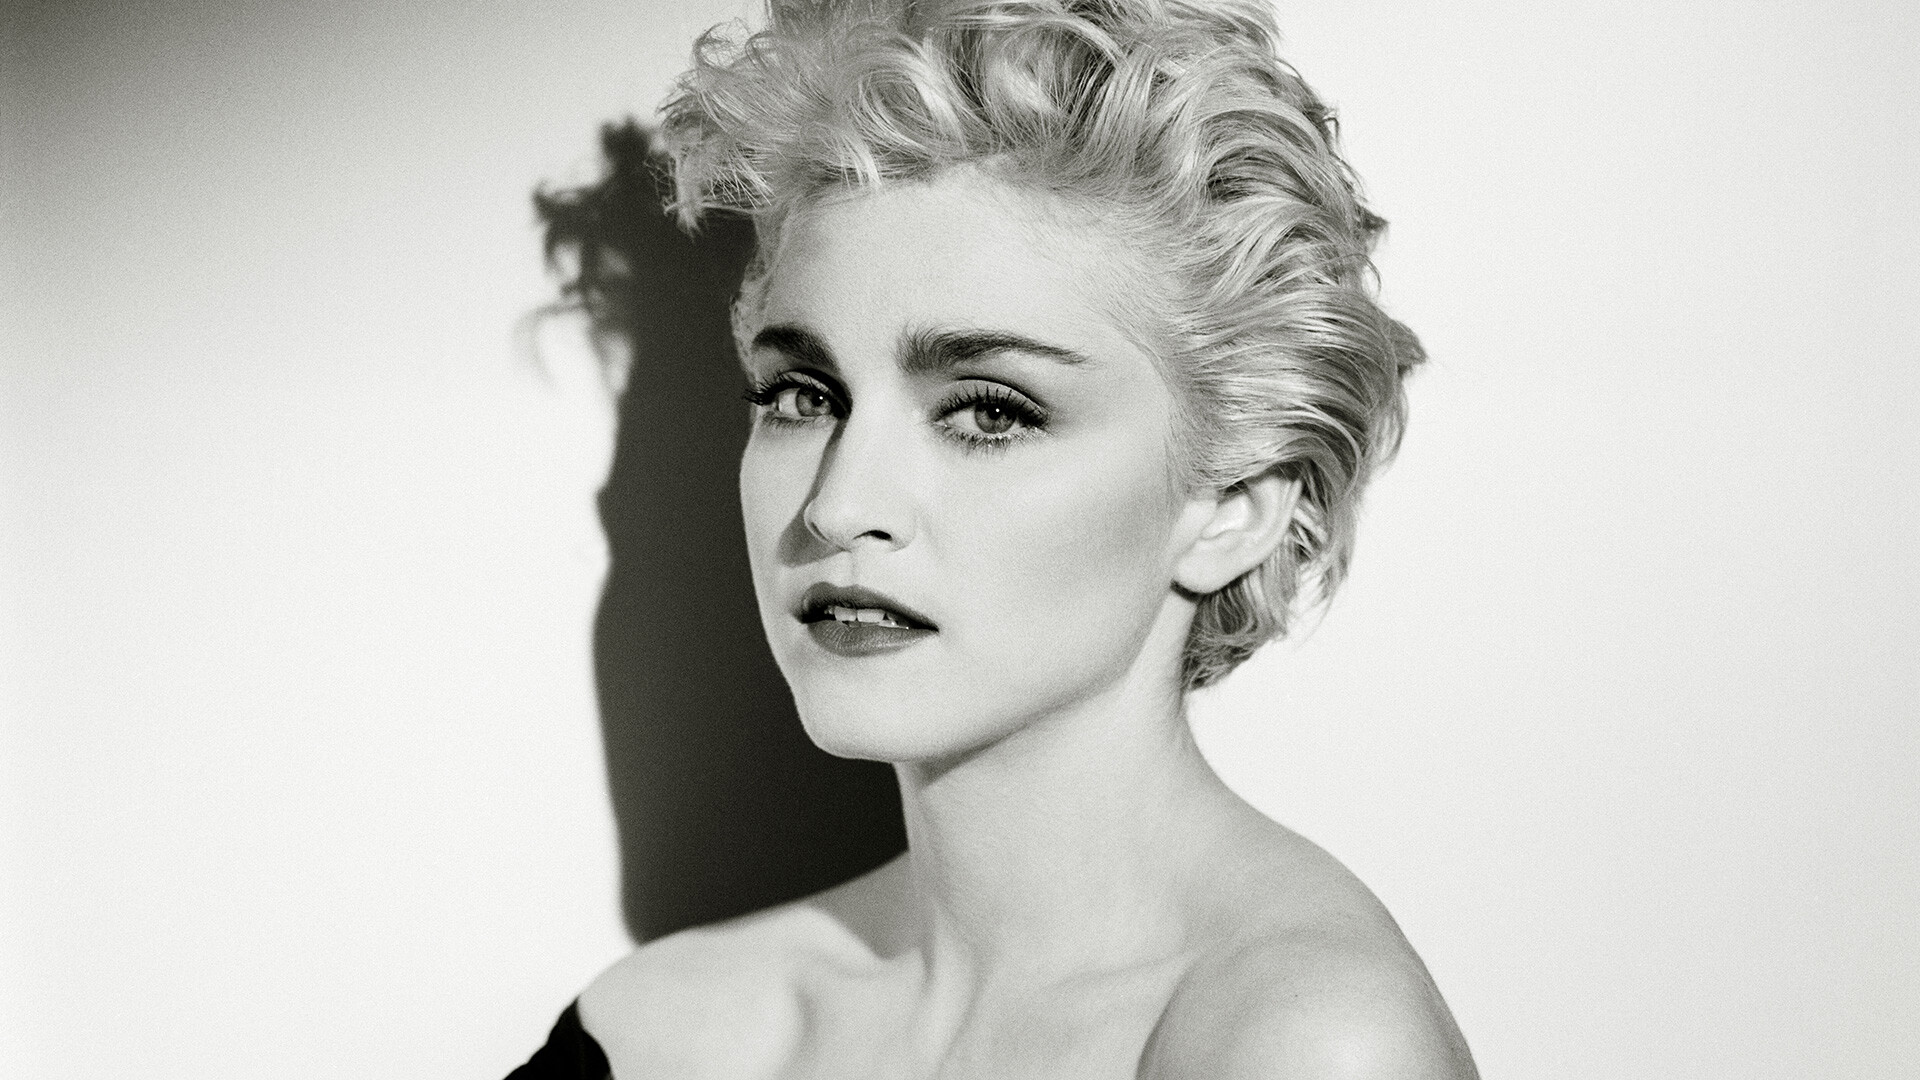 Madonna: An American entertainer who was born in Bay City, Michigan and raised in the Michigan suburbs of Pontiac and Avon Township. 1920x1080 Full HD Background.